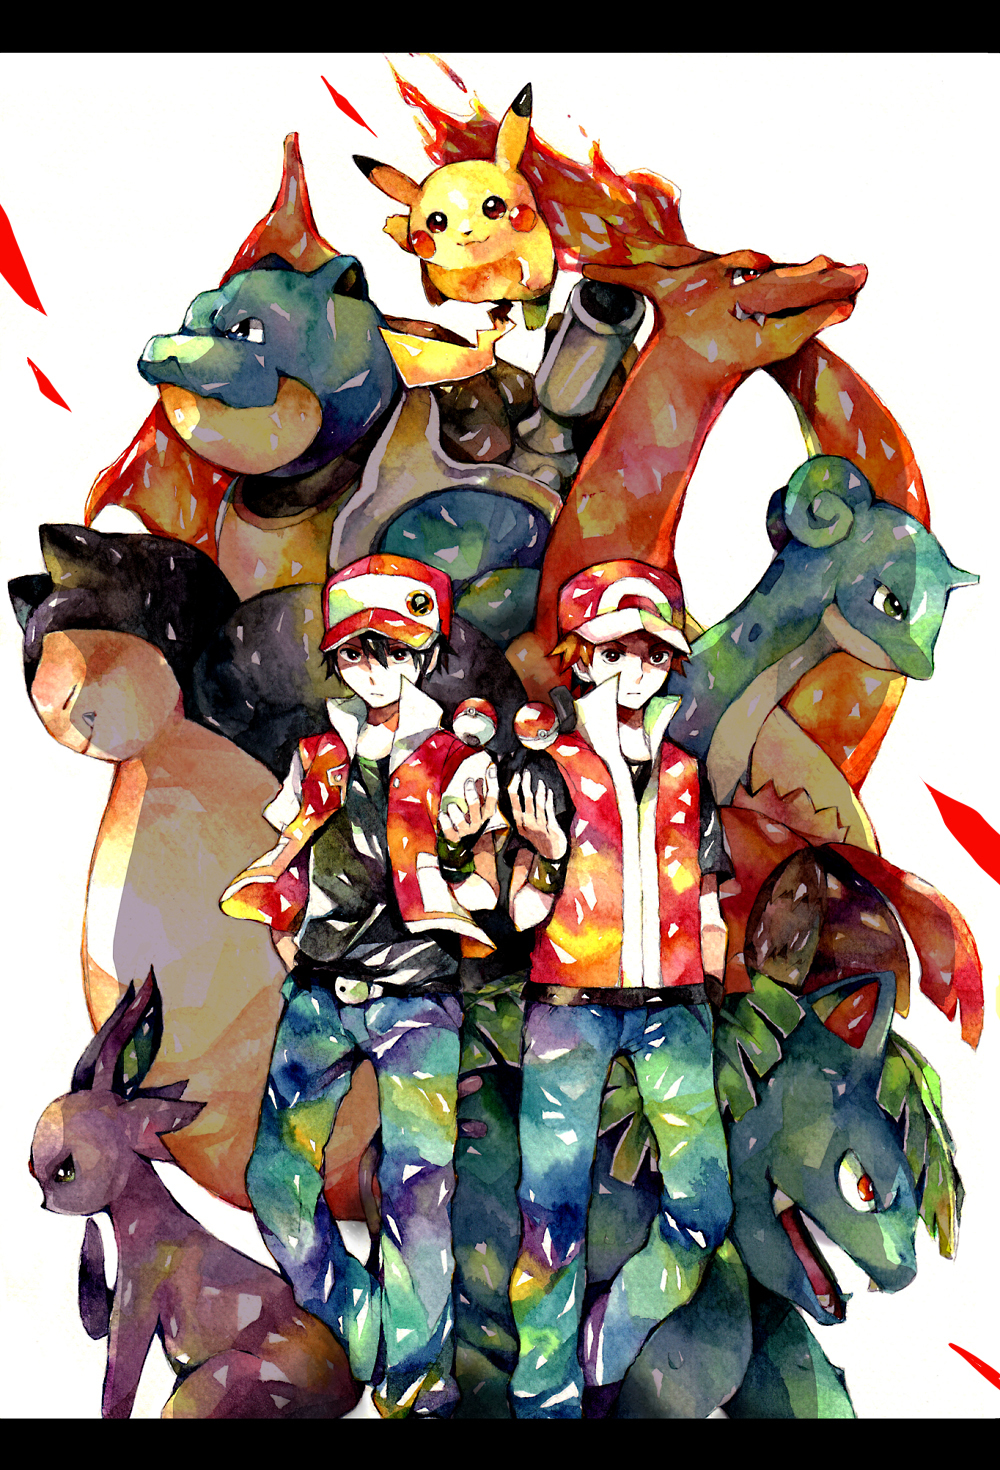 pikachu, red, charizard, lapras, snorlax, and 2 more (pokemon and